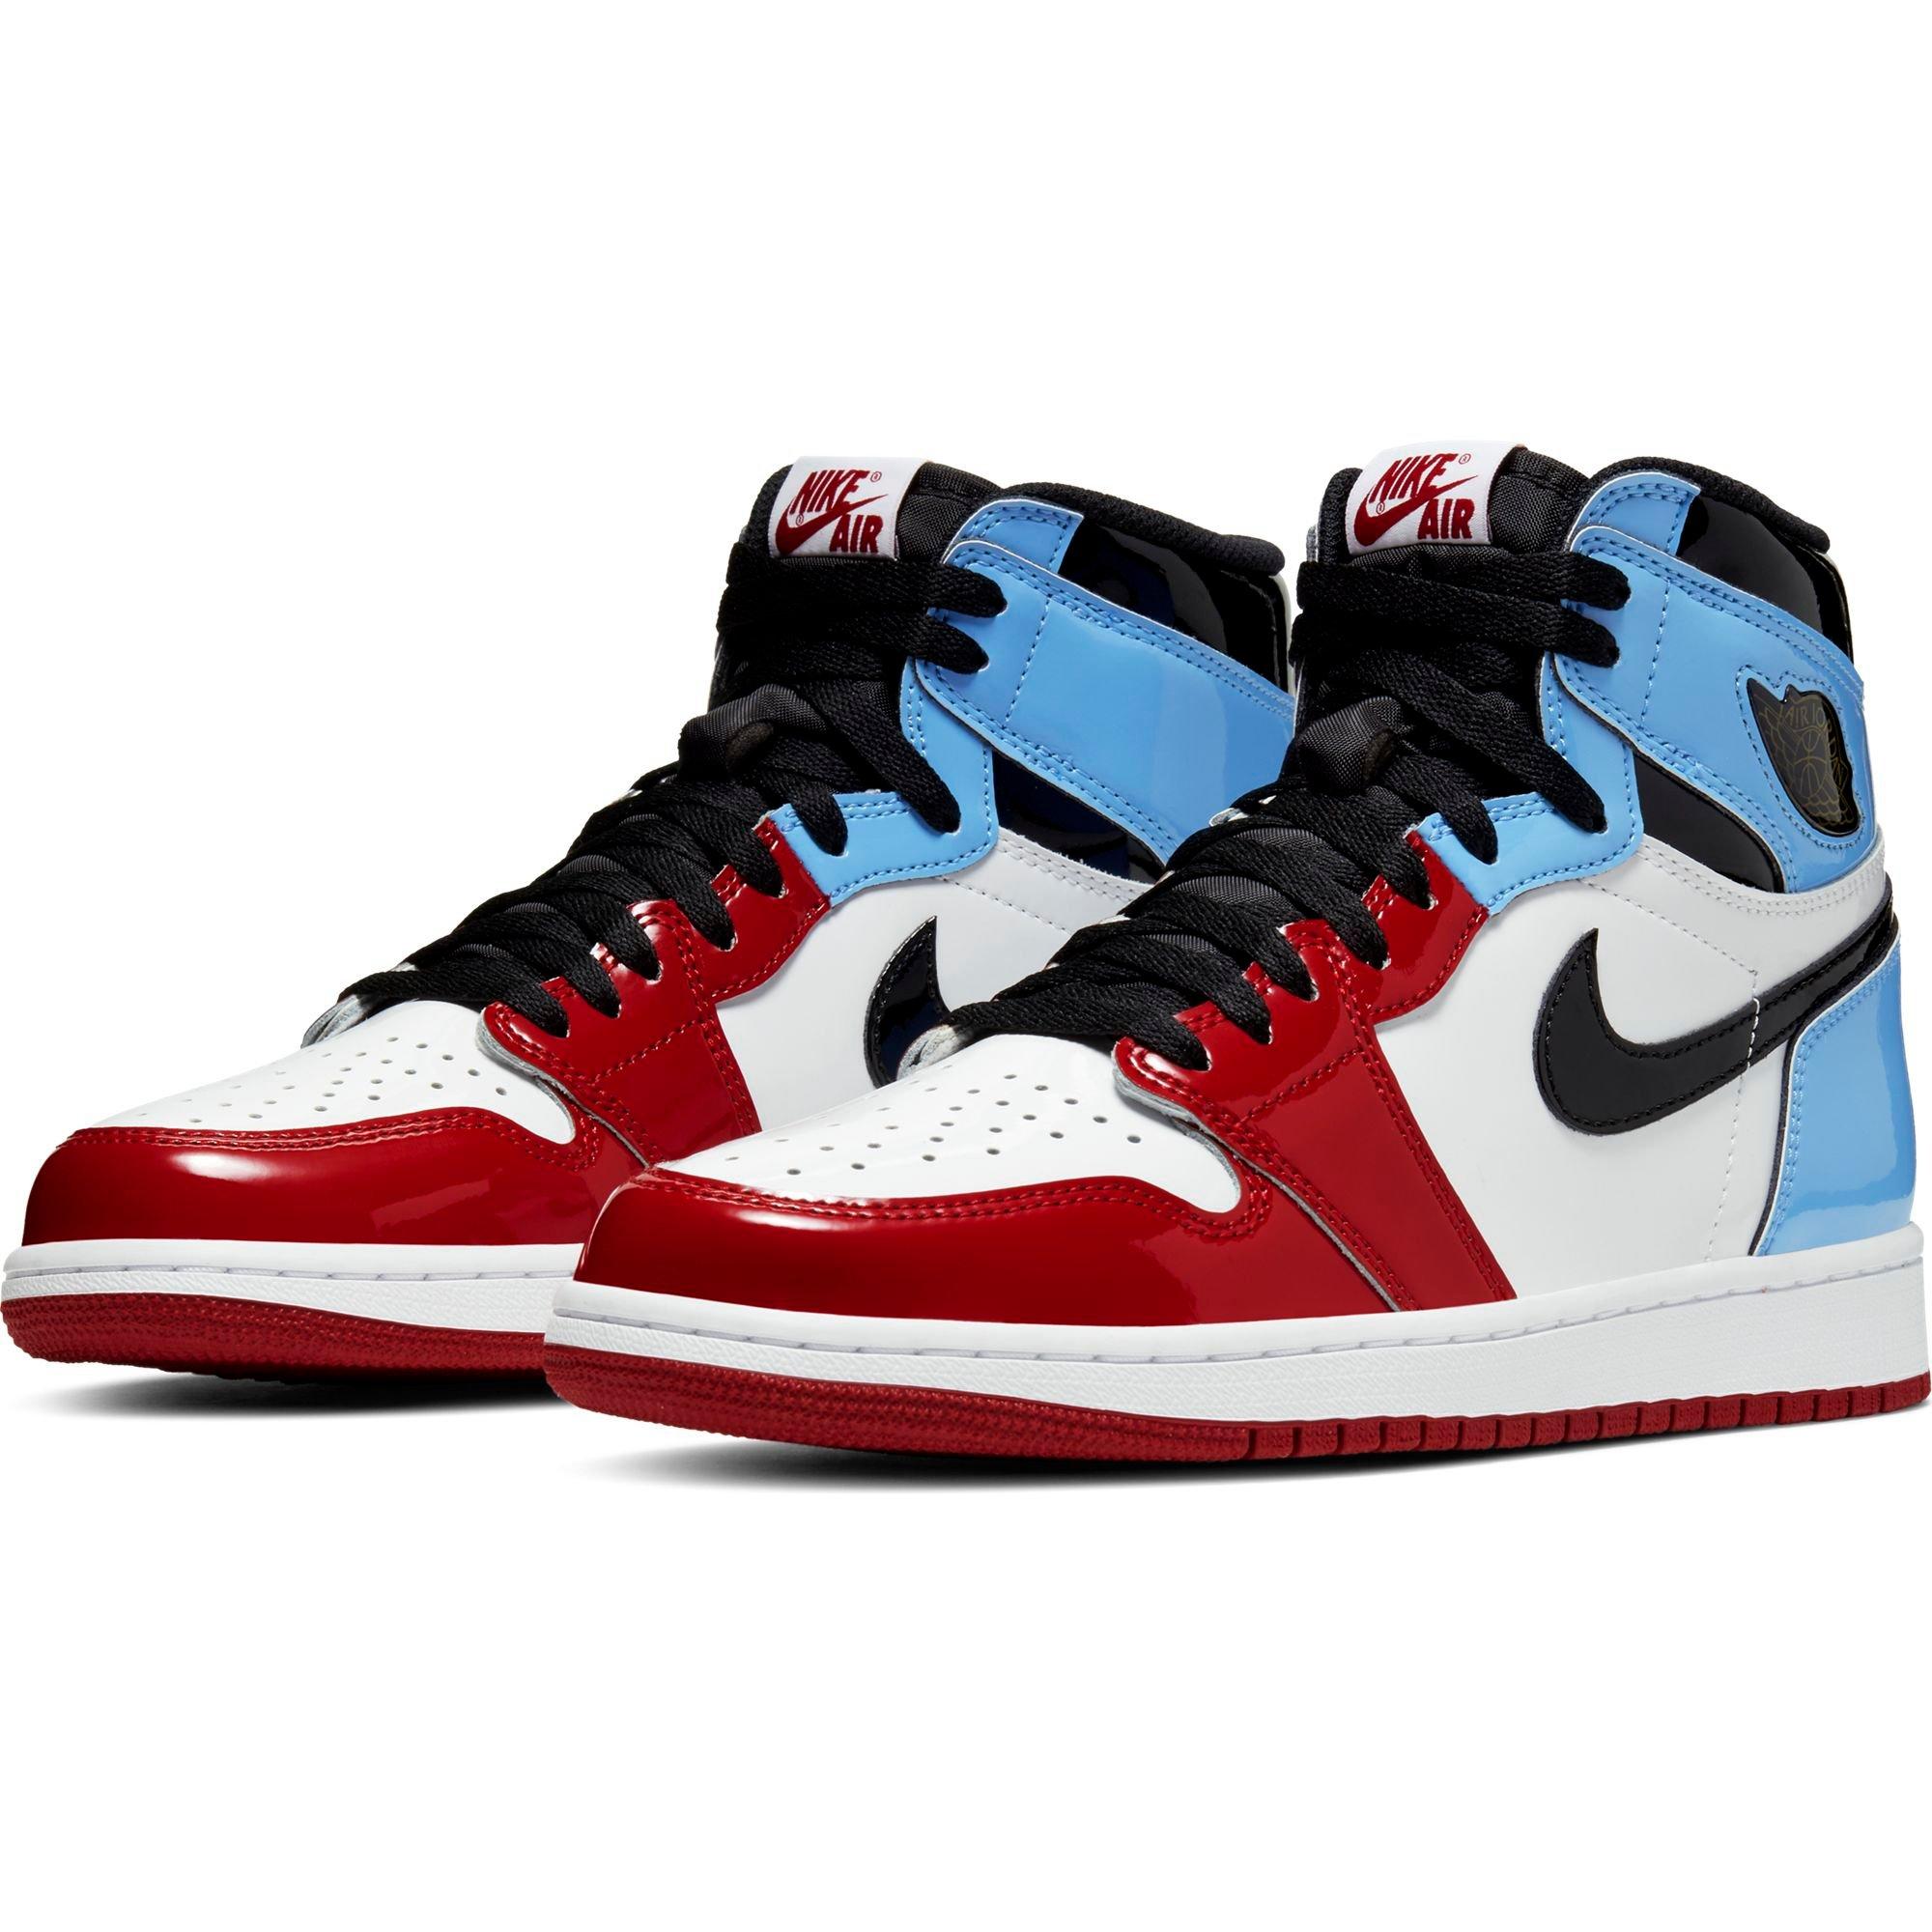 red and blue ones